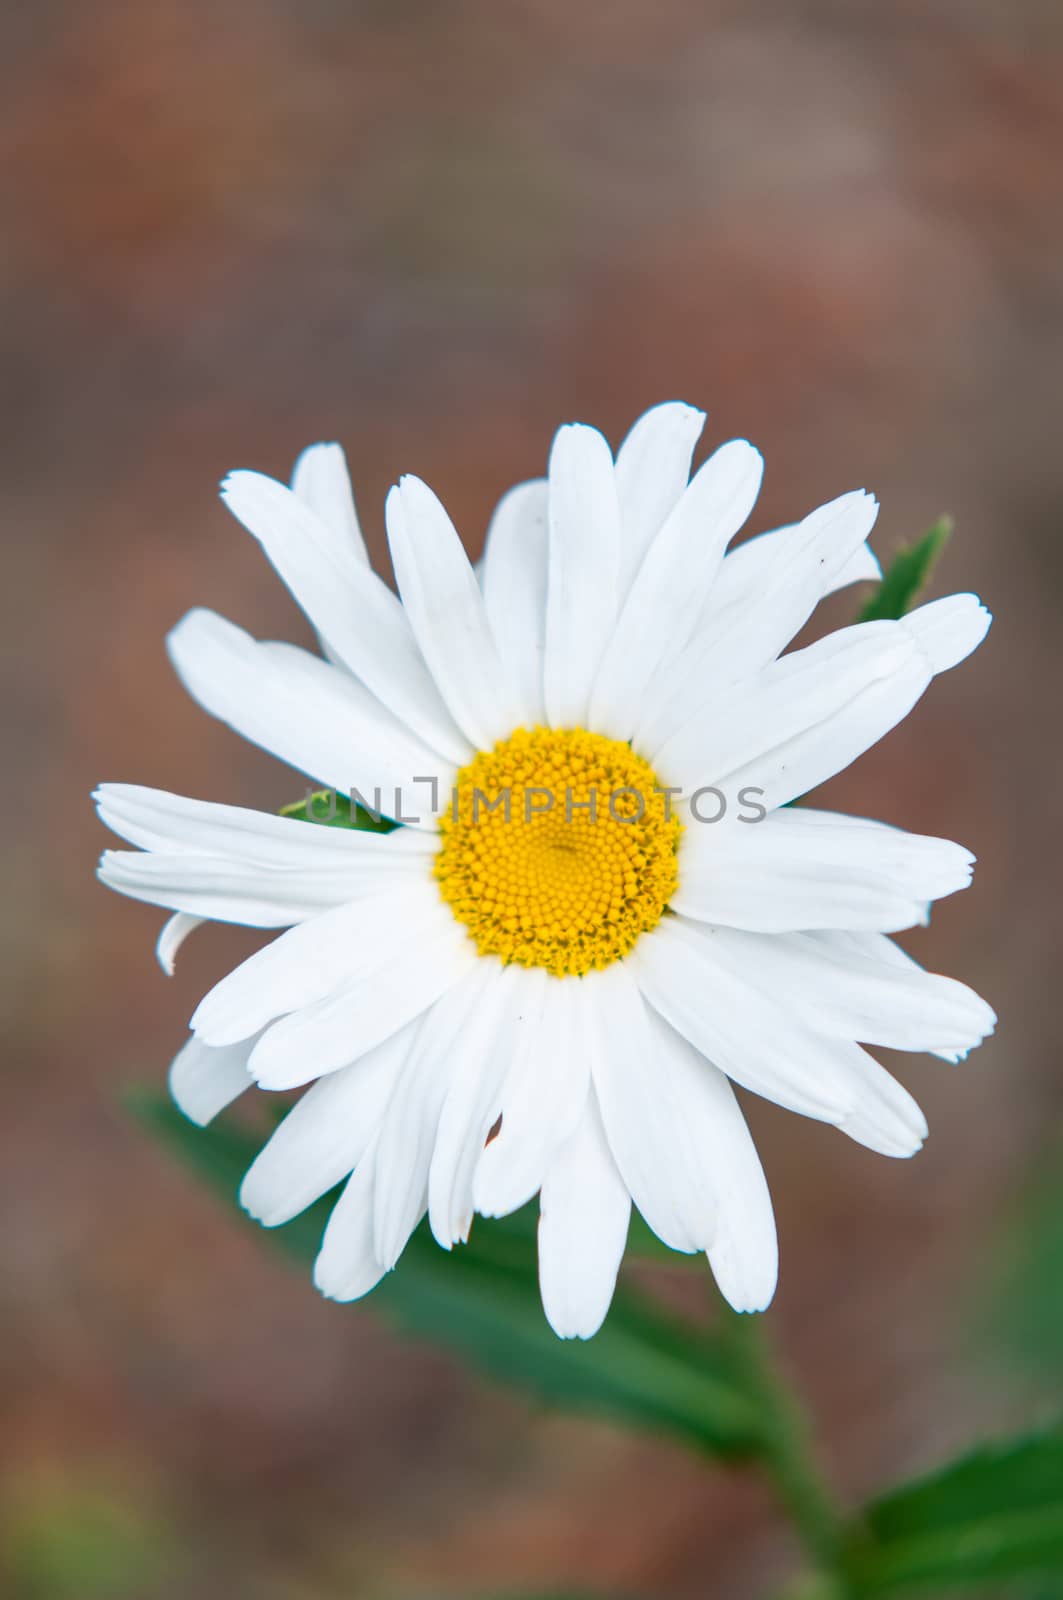 A small white flower captured in the Summer